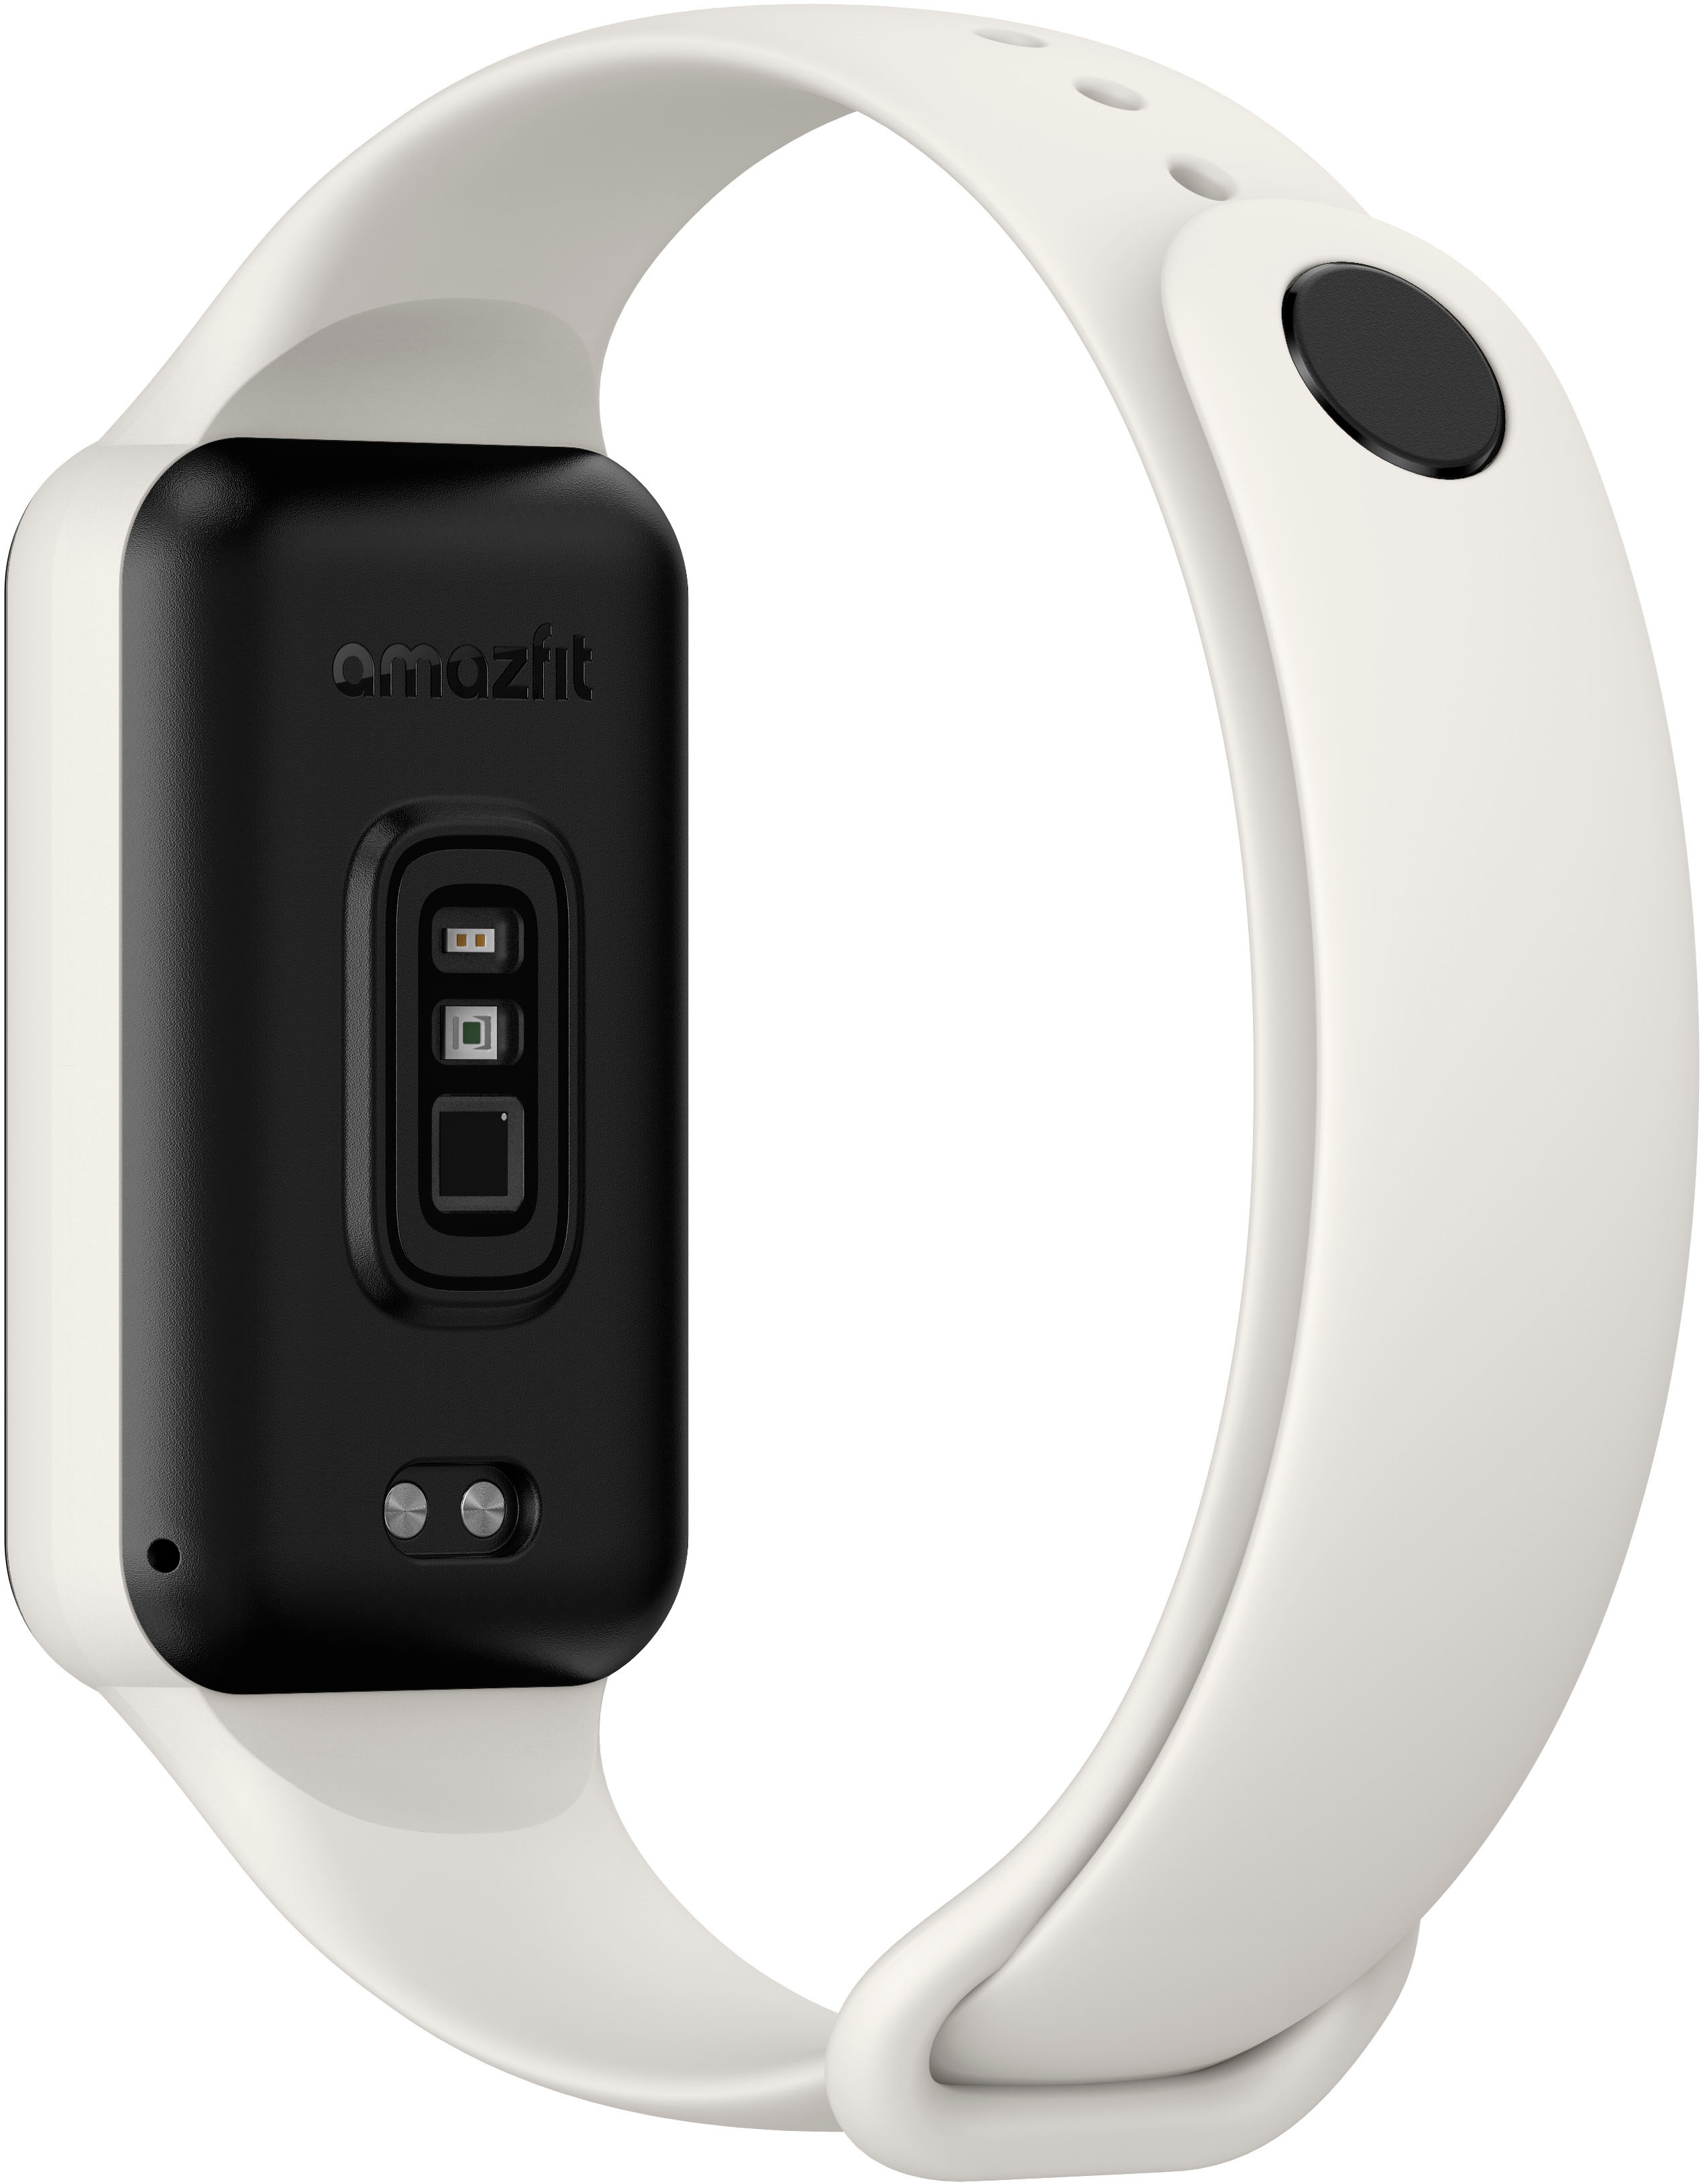 Amazfit Band 7 review: The ideal budget fitness tracker for casual athletes